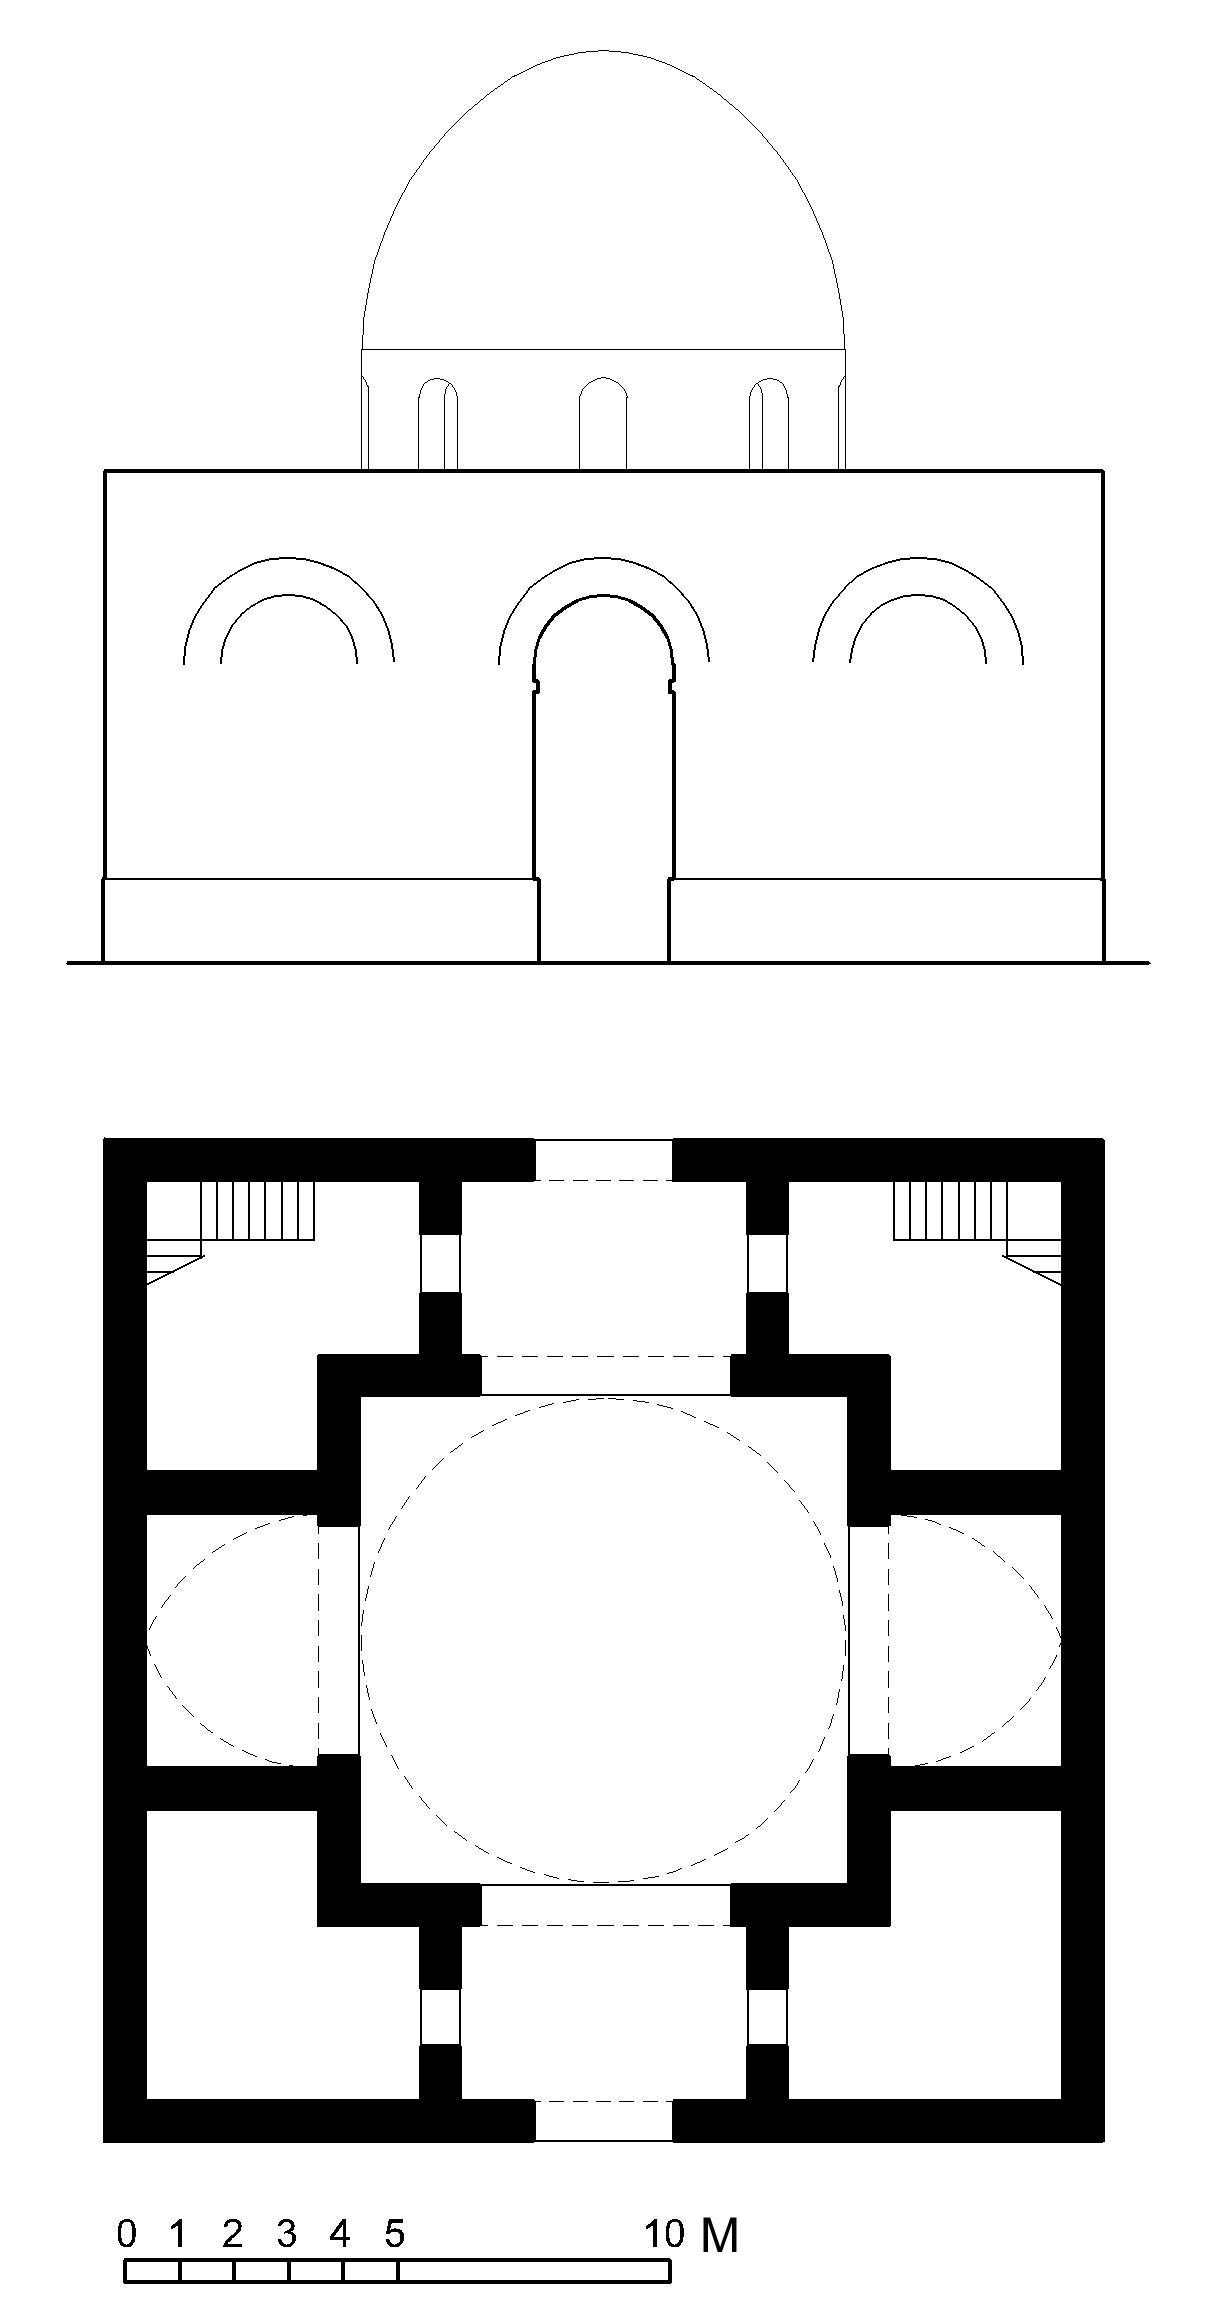 Umayyad Palace at Amman - Floor plan and section of qasr in AutoCAD 2000 format. Click the download button to download a zipped file containing the .dwg file. 